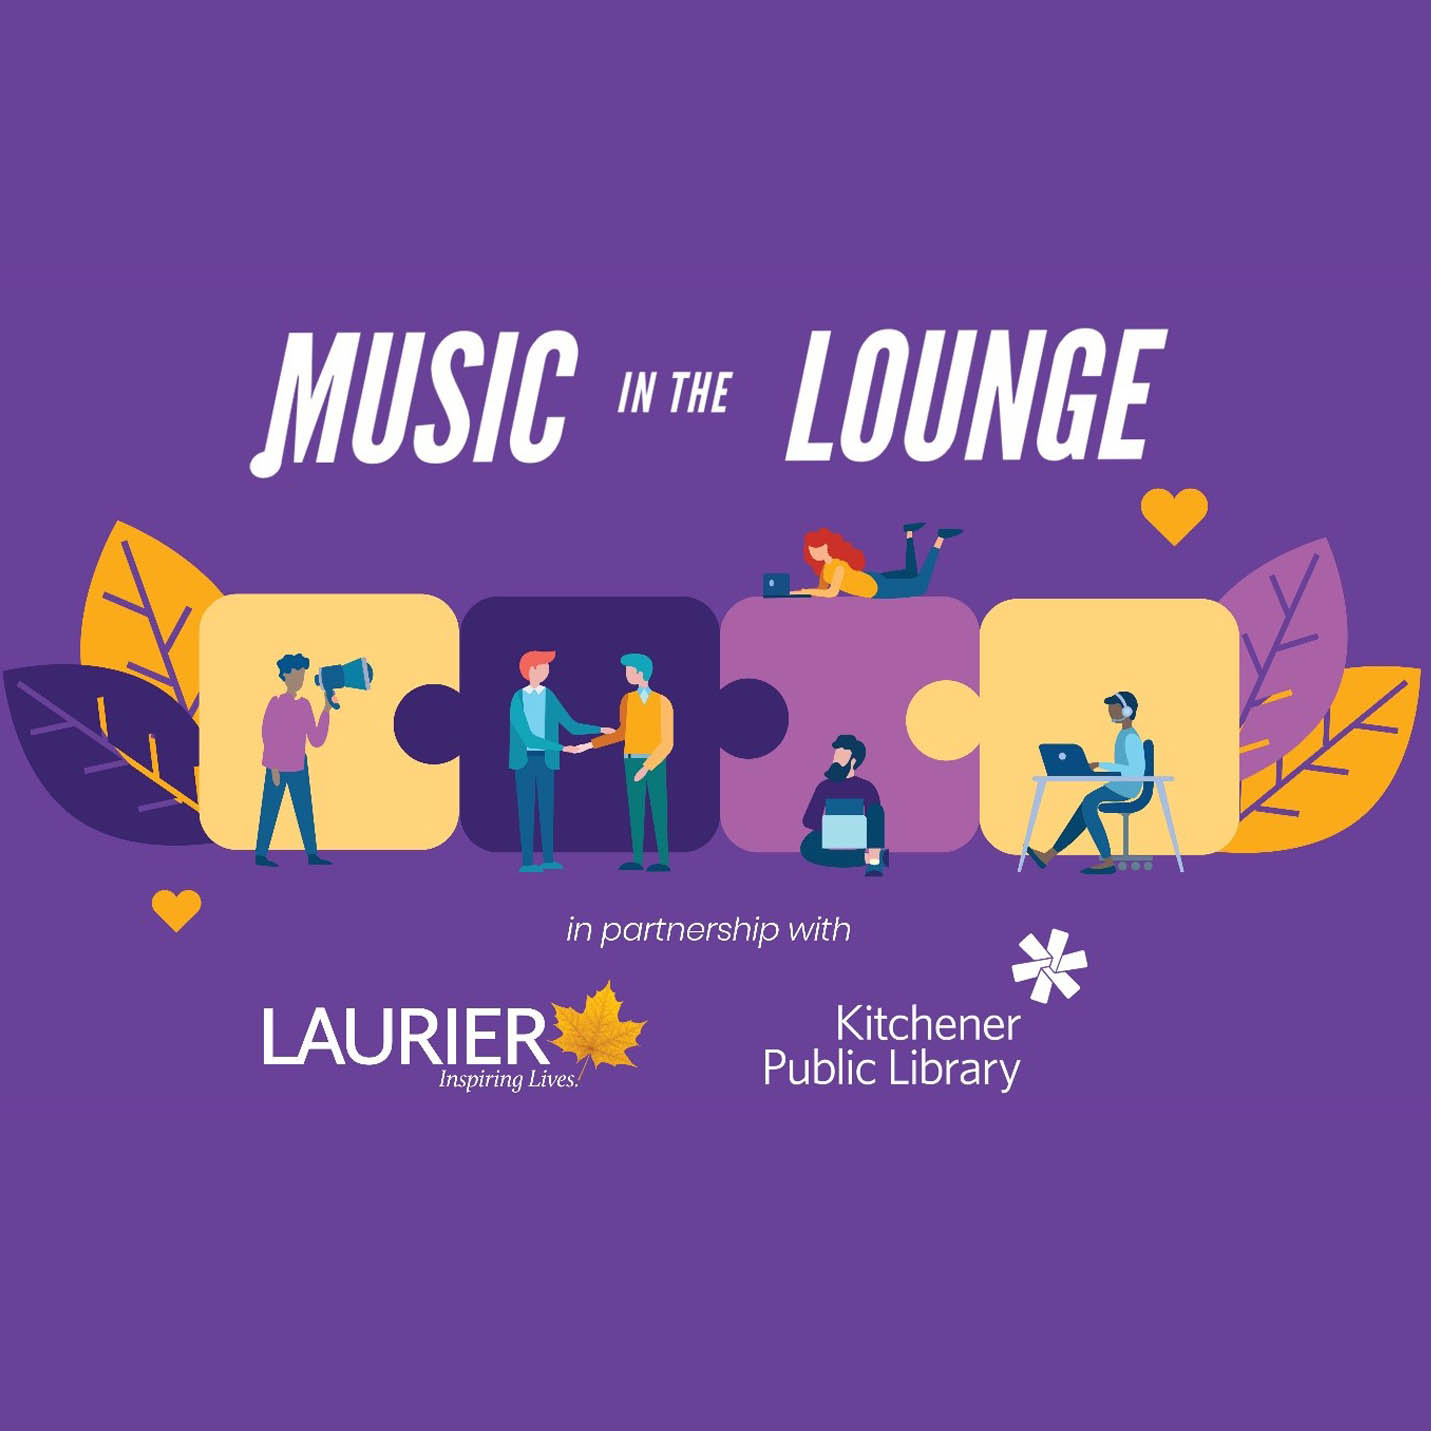 Music in the Lounge, in partnership with Laurier and Kitchener Public Library